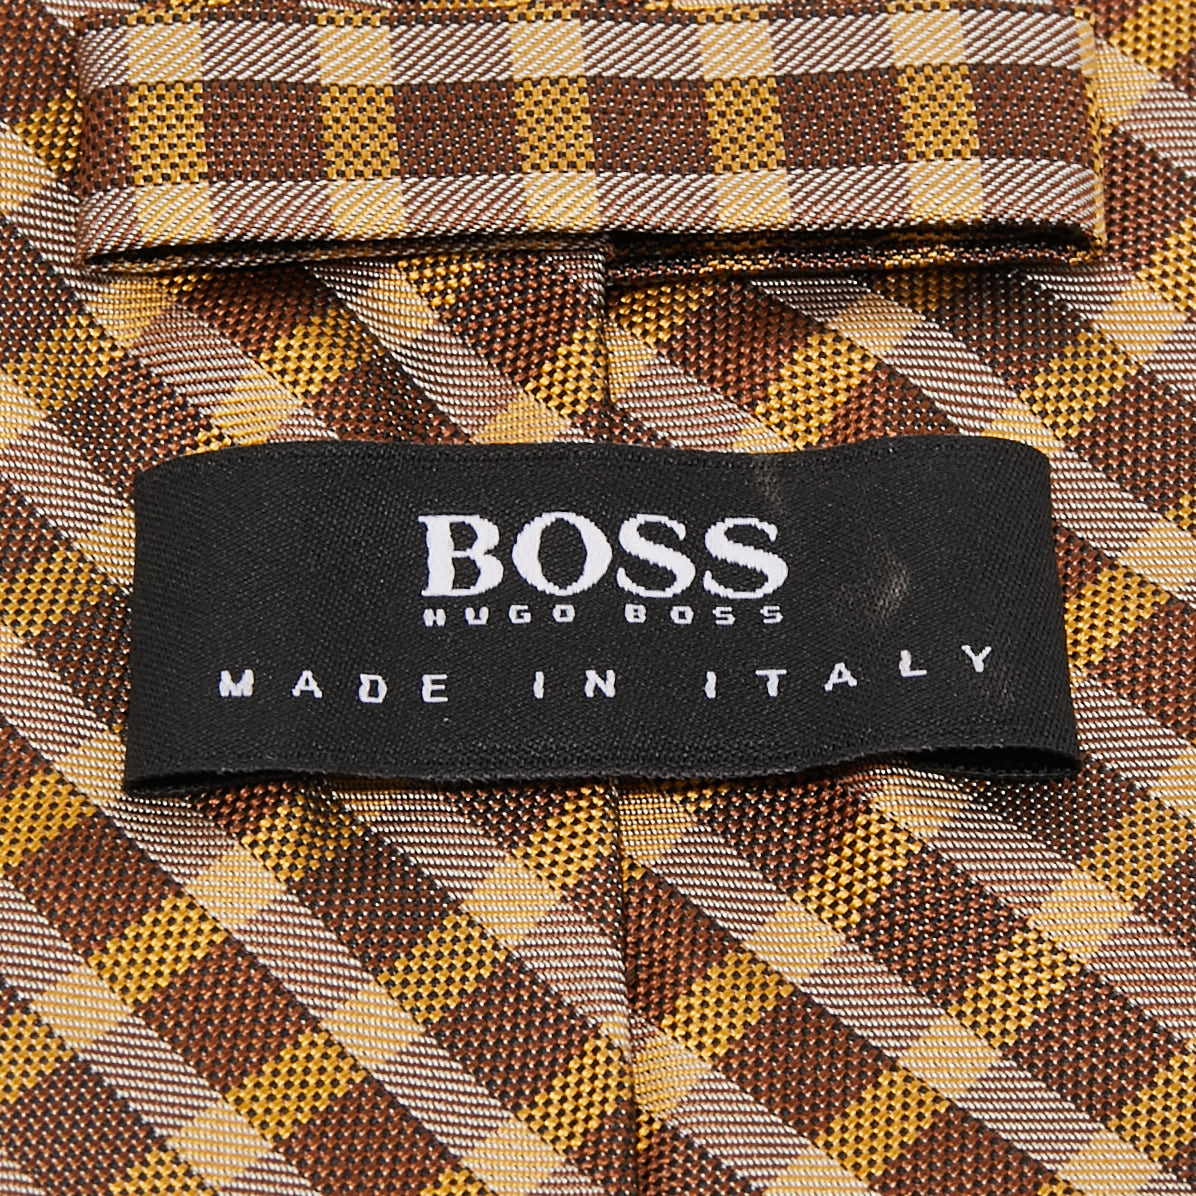 Boss By Hugo Boss Brown/Yellow Check Patterned Silk Tie